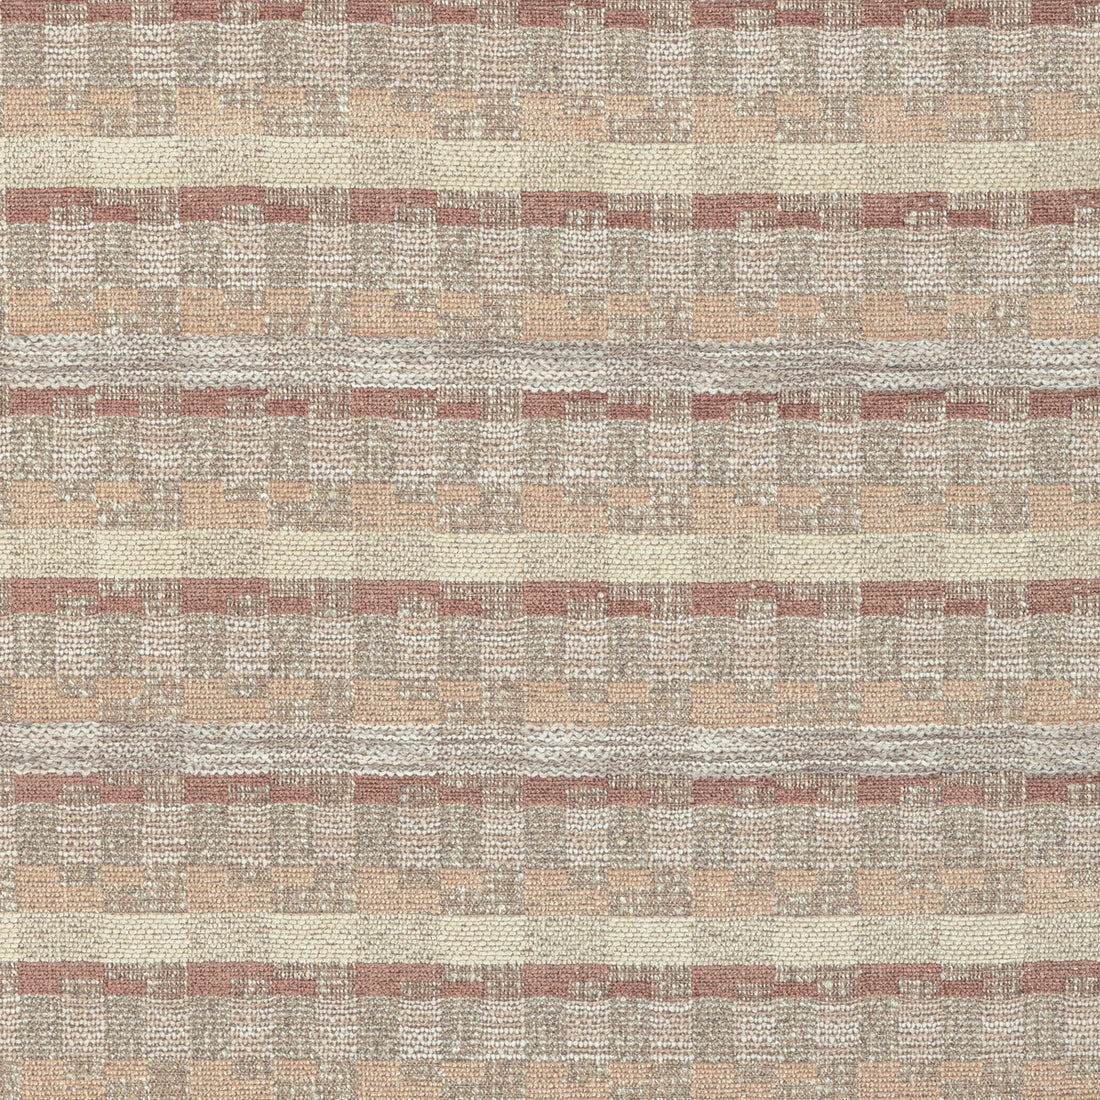 Gridley fabric in pink sand color - pattern 36392.612.0 - by Kravet Couture in the Barbara Barry Ojai collection